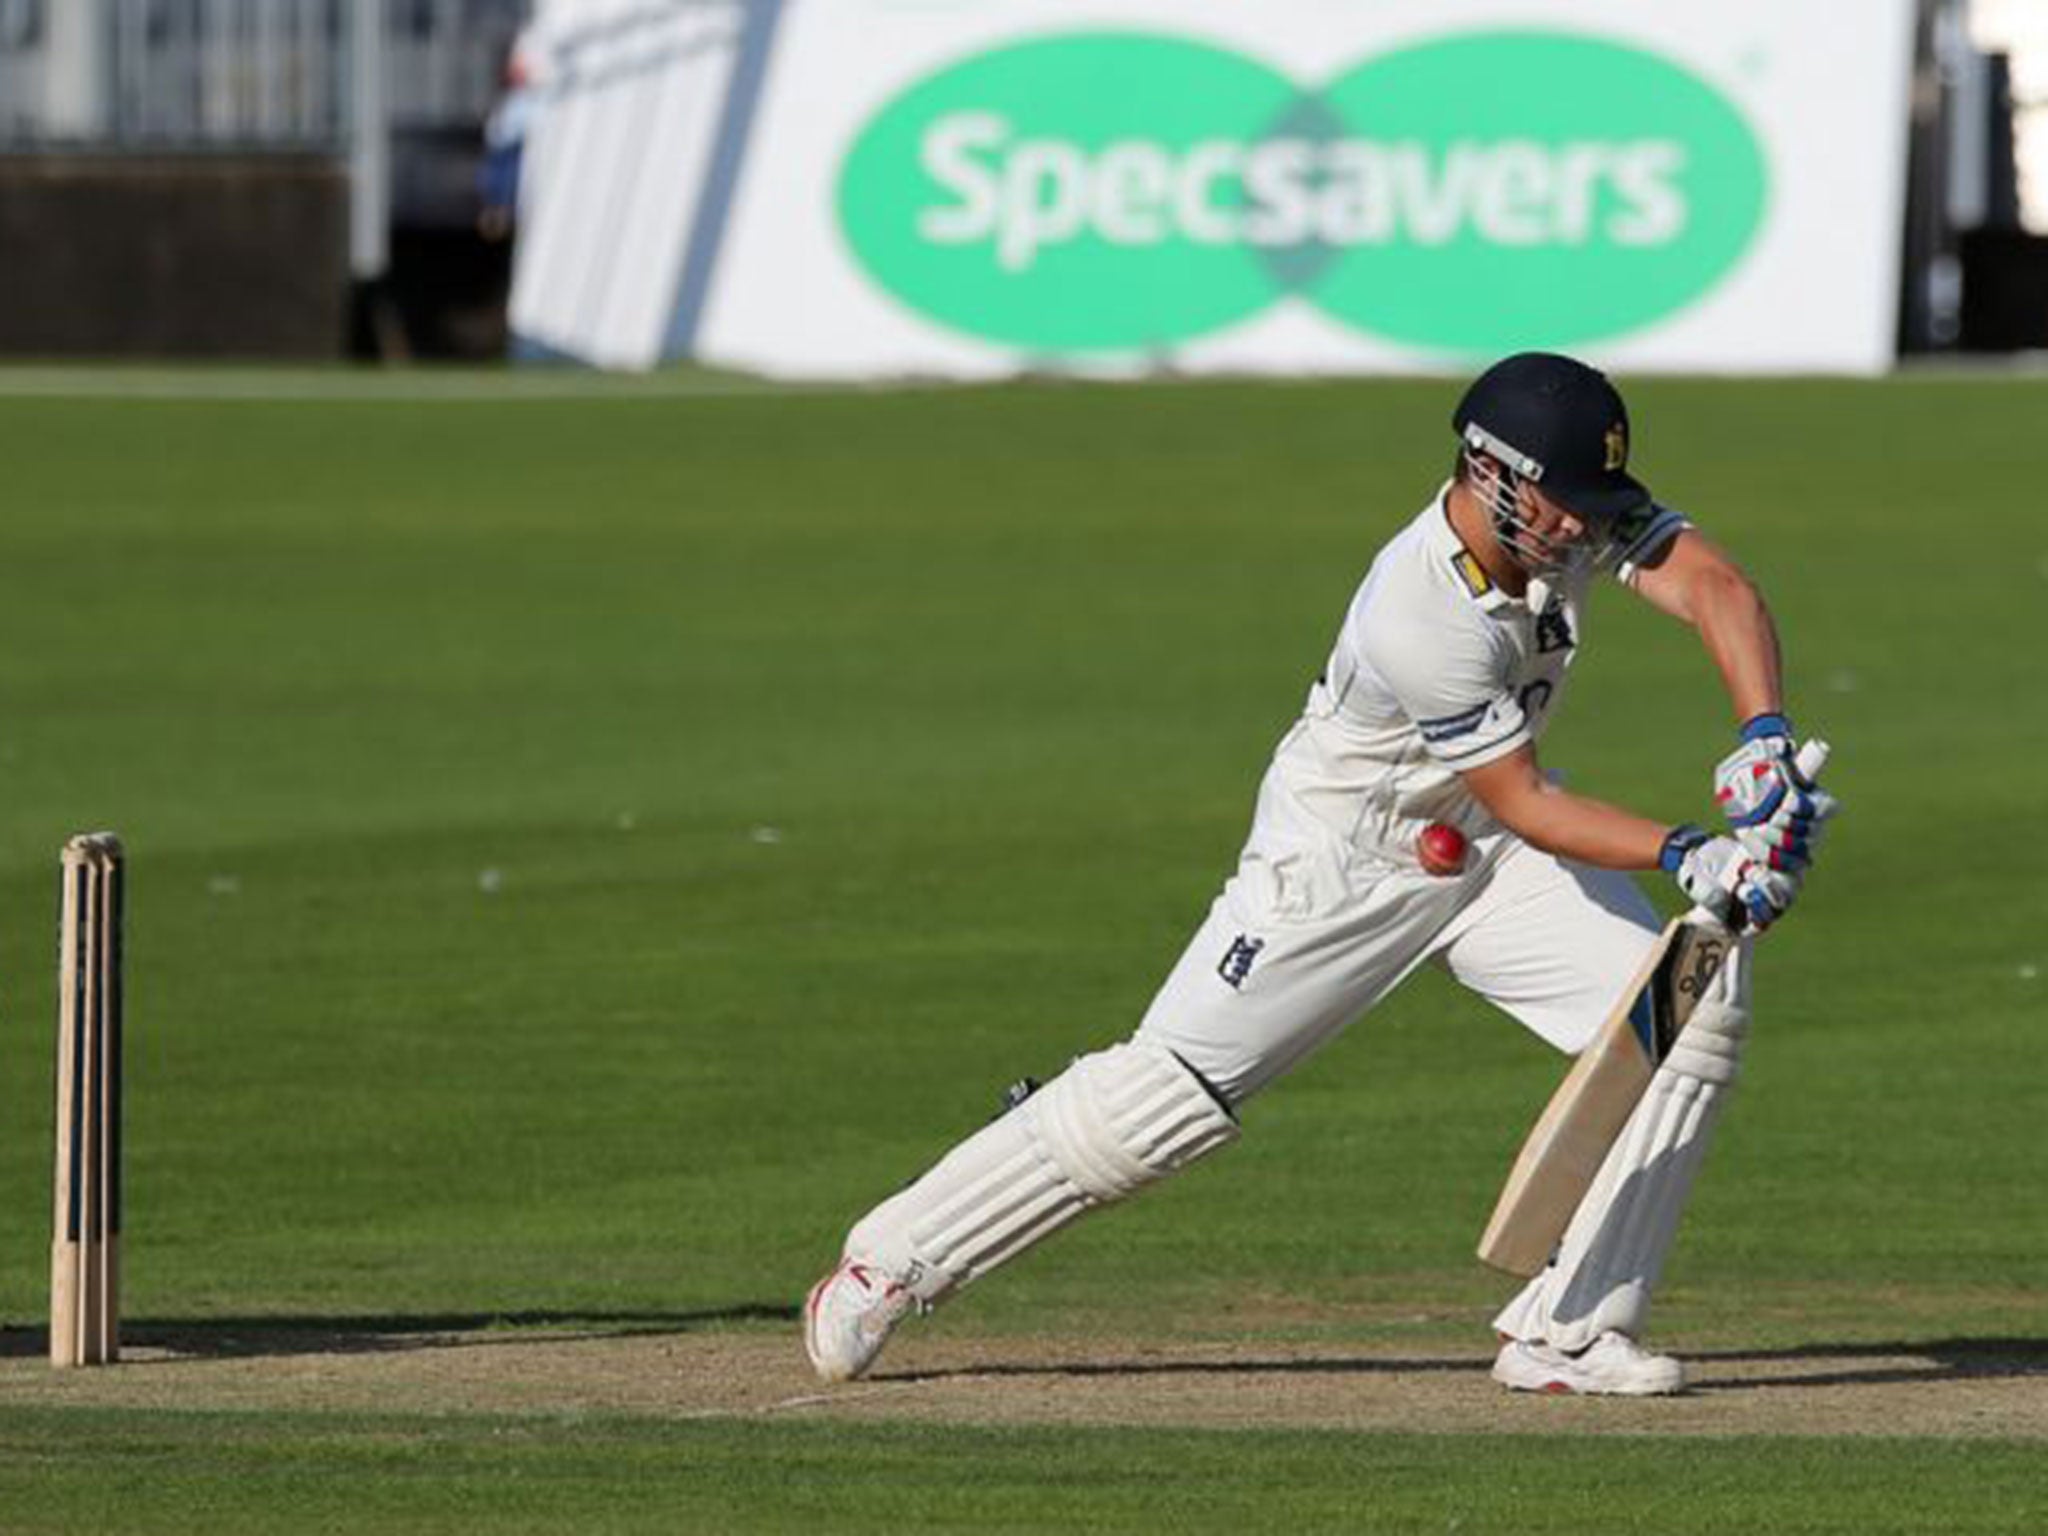 Hain finished on 109 not out in a Warwickshire total of 472